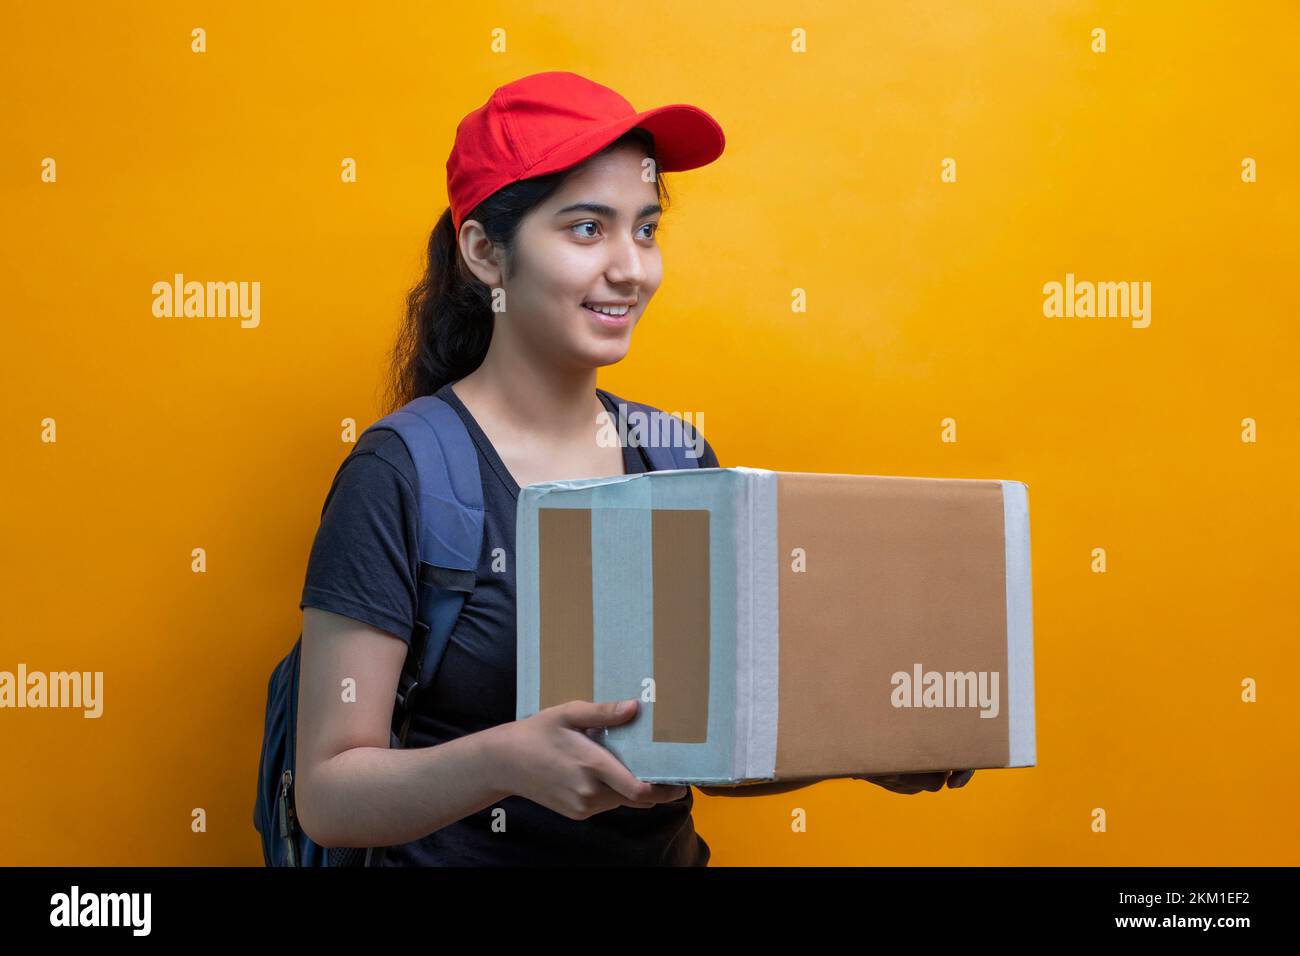 Young Delivery Woman Holding Cardboard Box Against Yellow Background Stock Photo